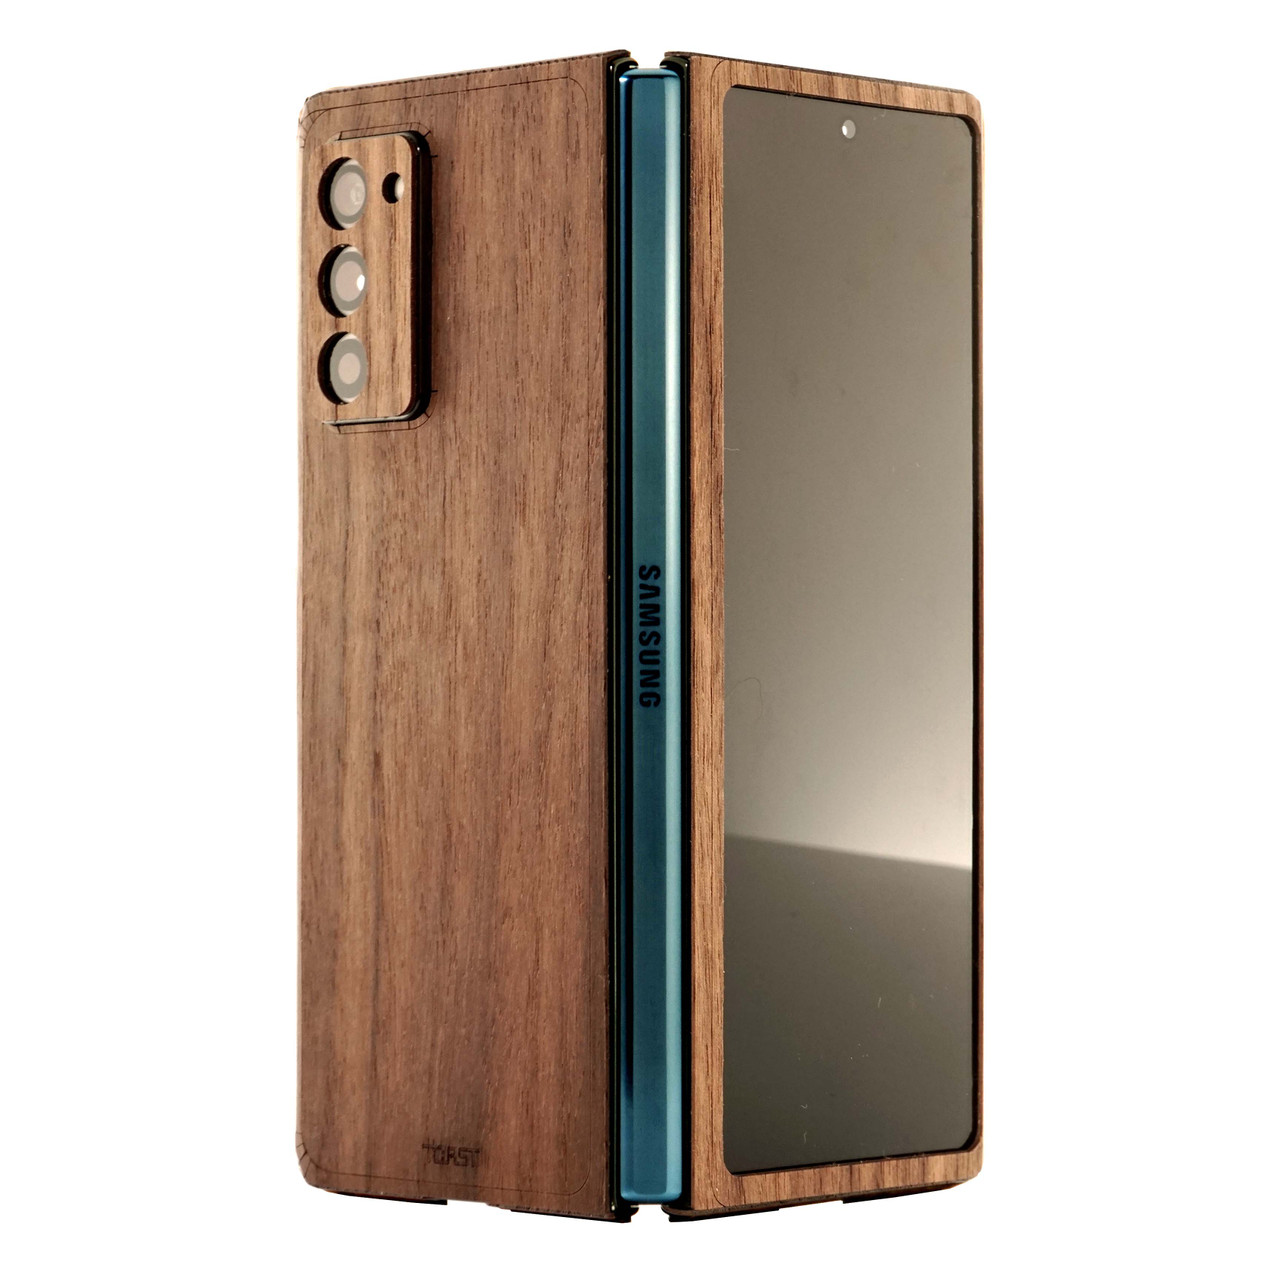 Real Wood Galaxy Fold 2 Covers |Toast | Made in USA